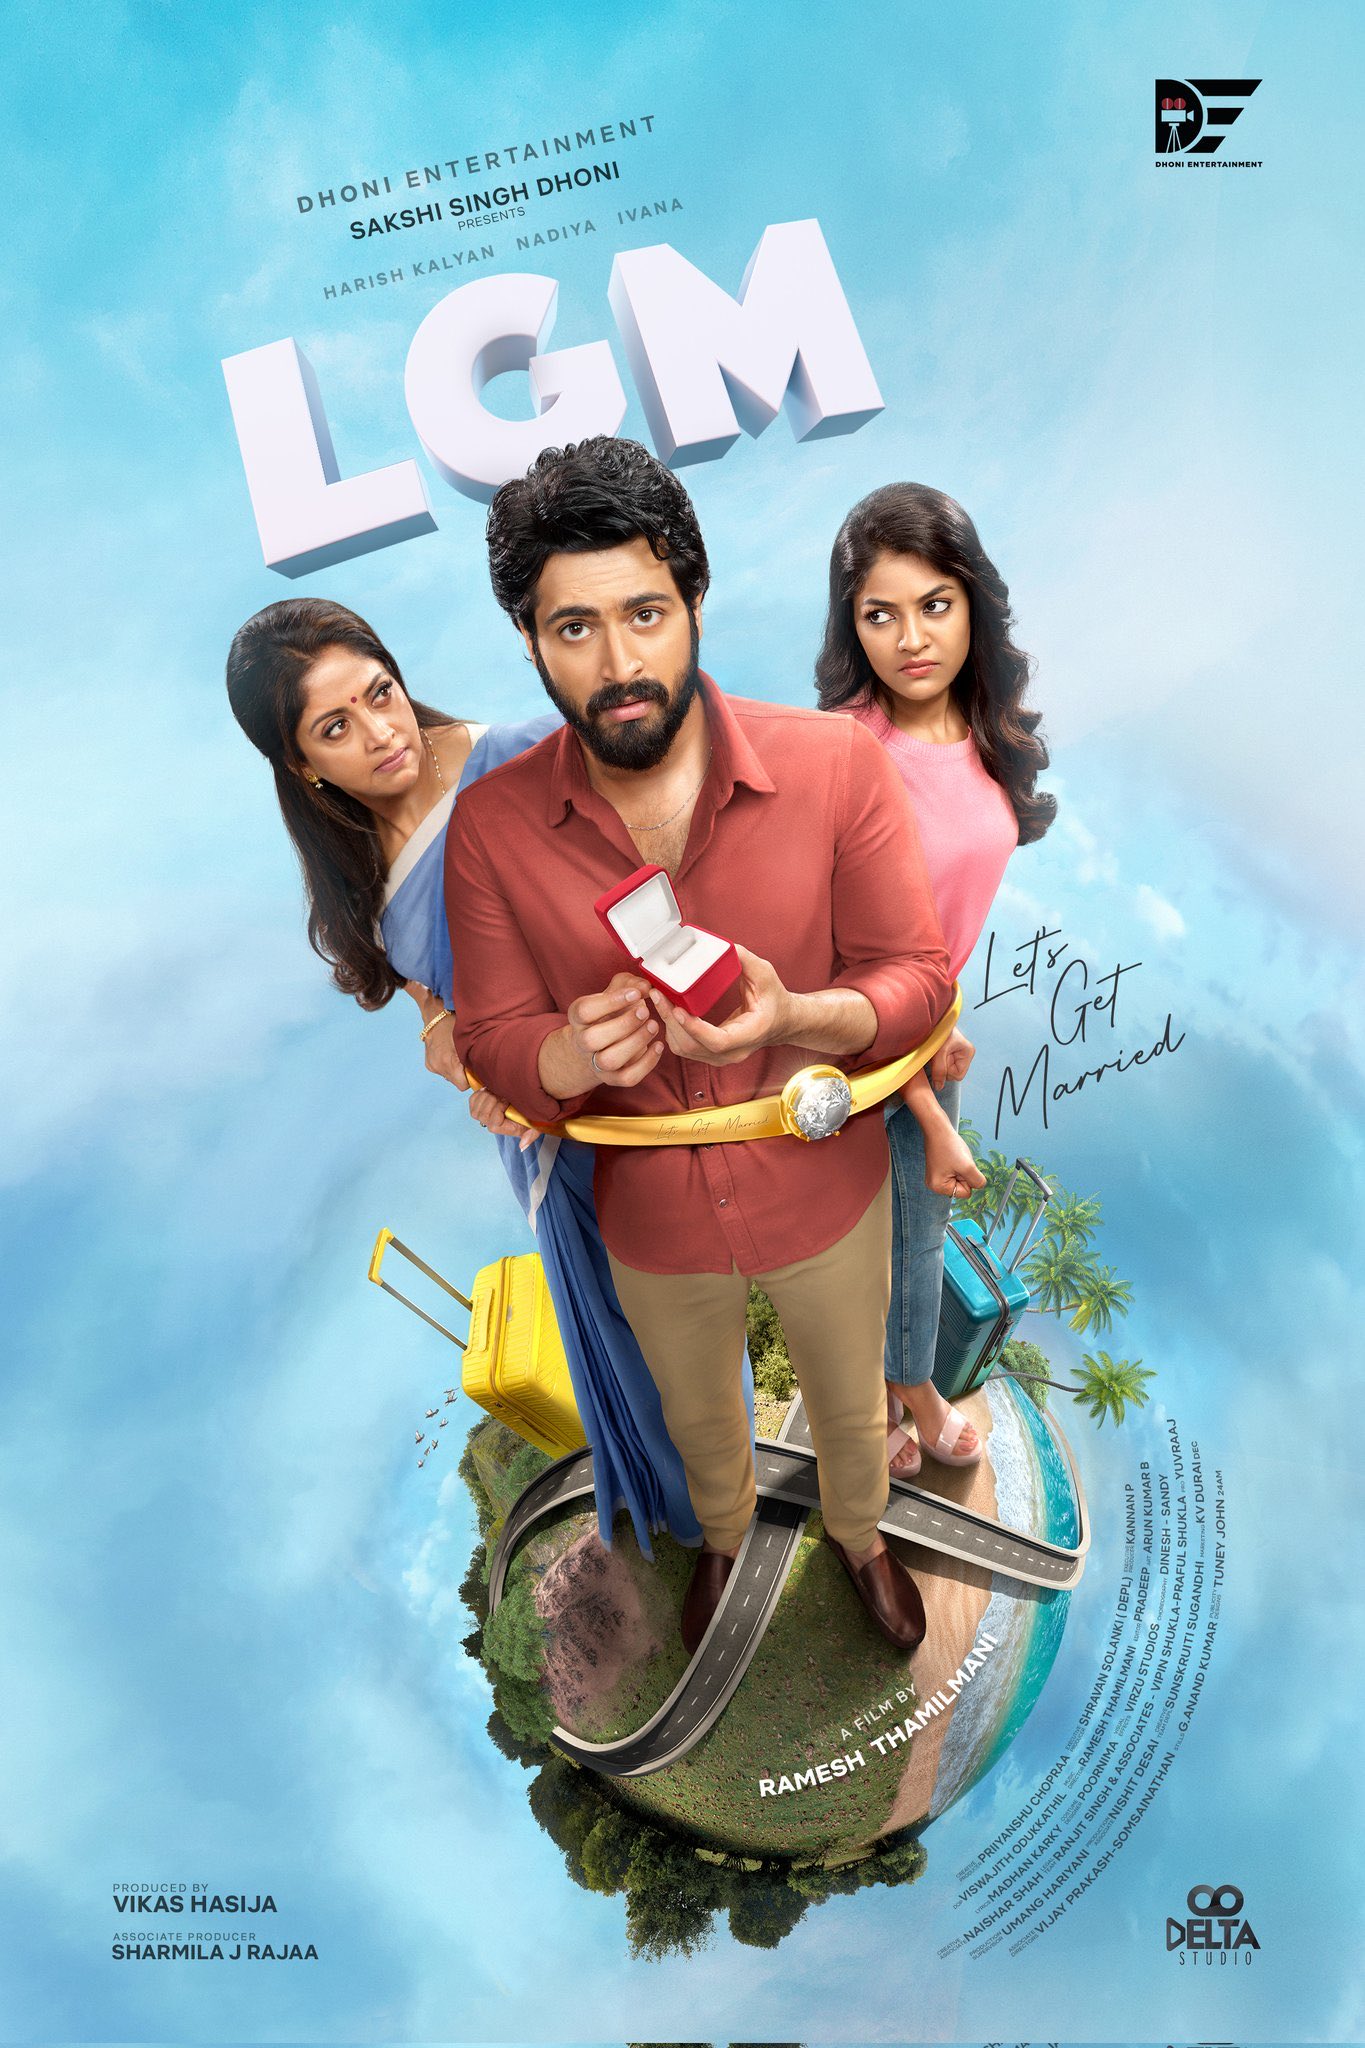 LGM first look poster